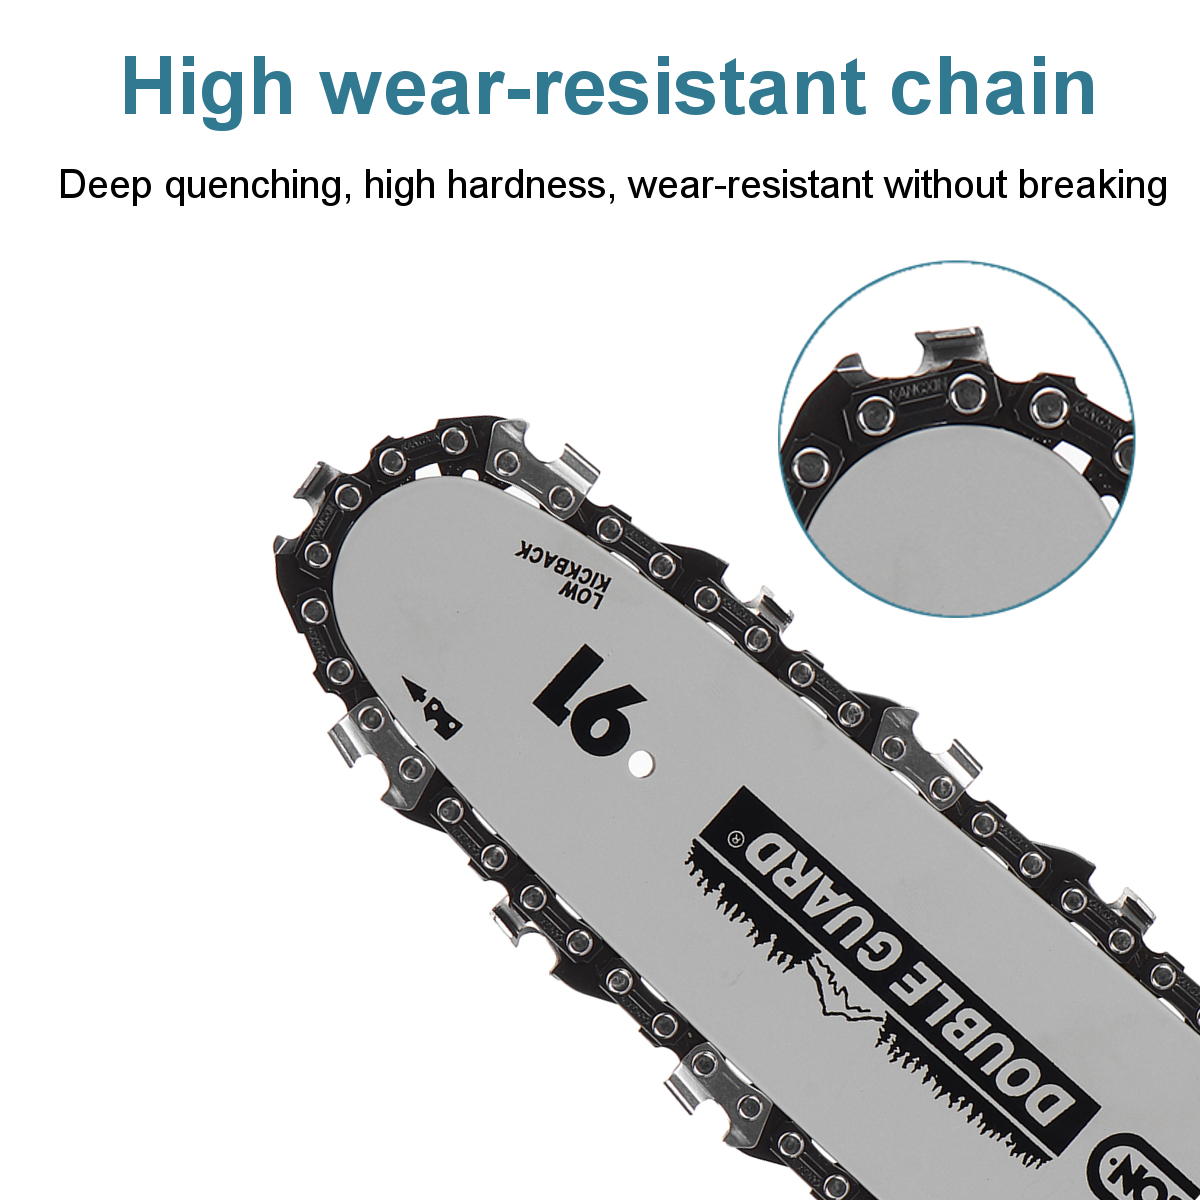 10-Inch-588VF-Electric-Chain-Saw-Woodworking-Tool-Portable-Chainsaws-w-1pc2pcs-Battery-For-Cutting-P-1823938-4